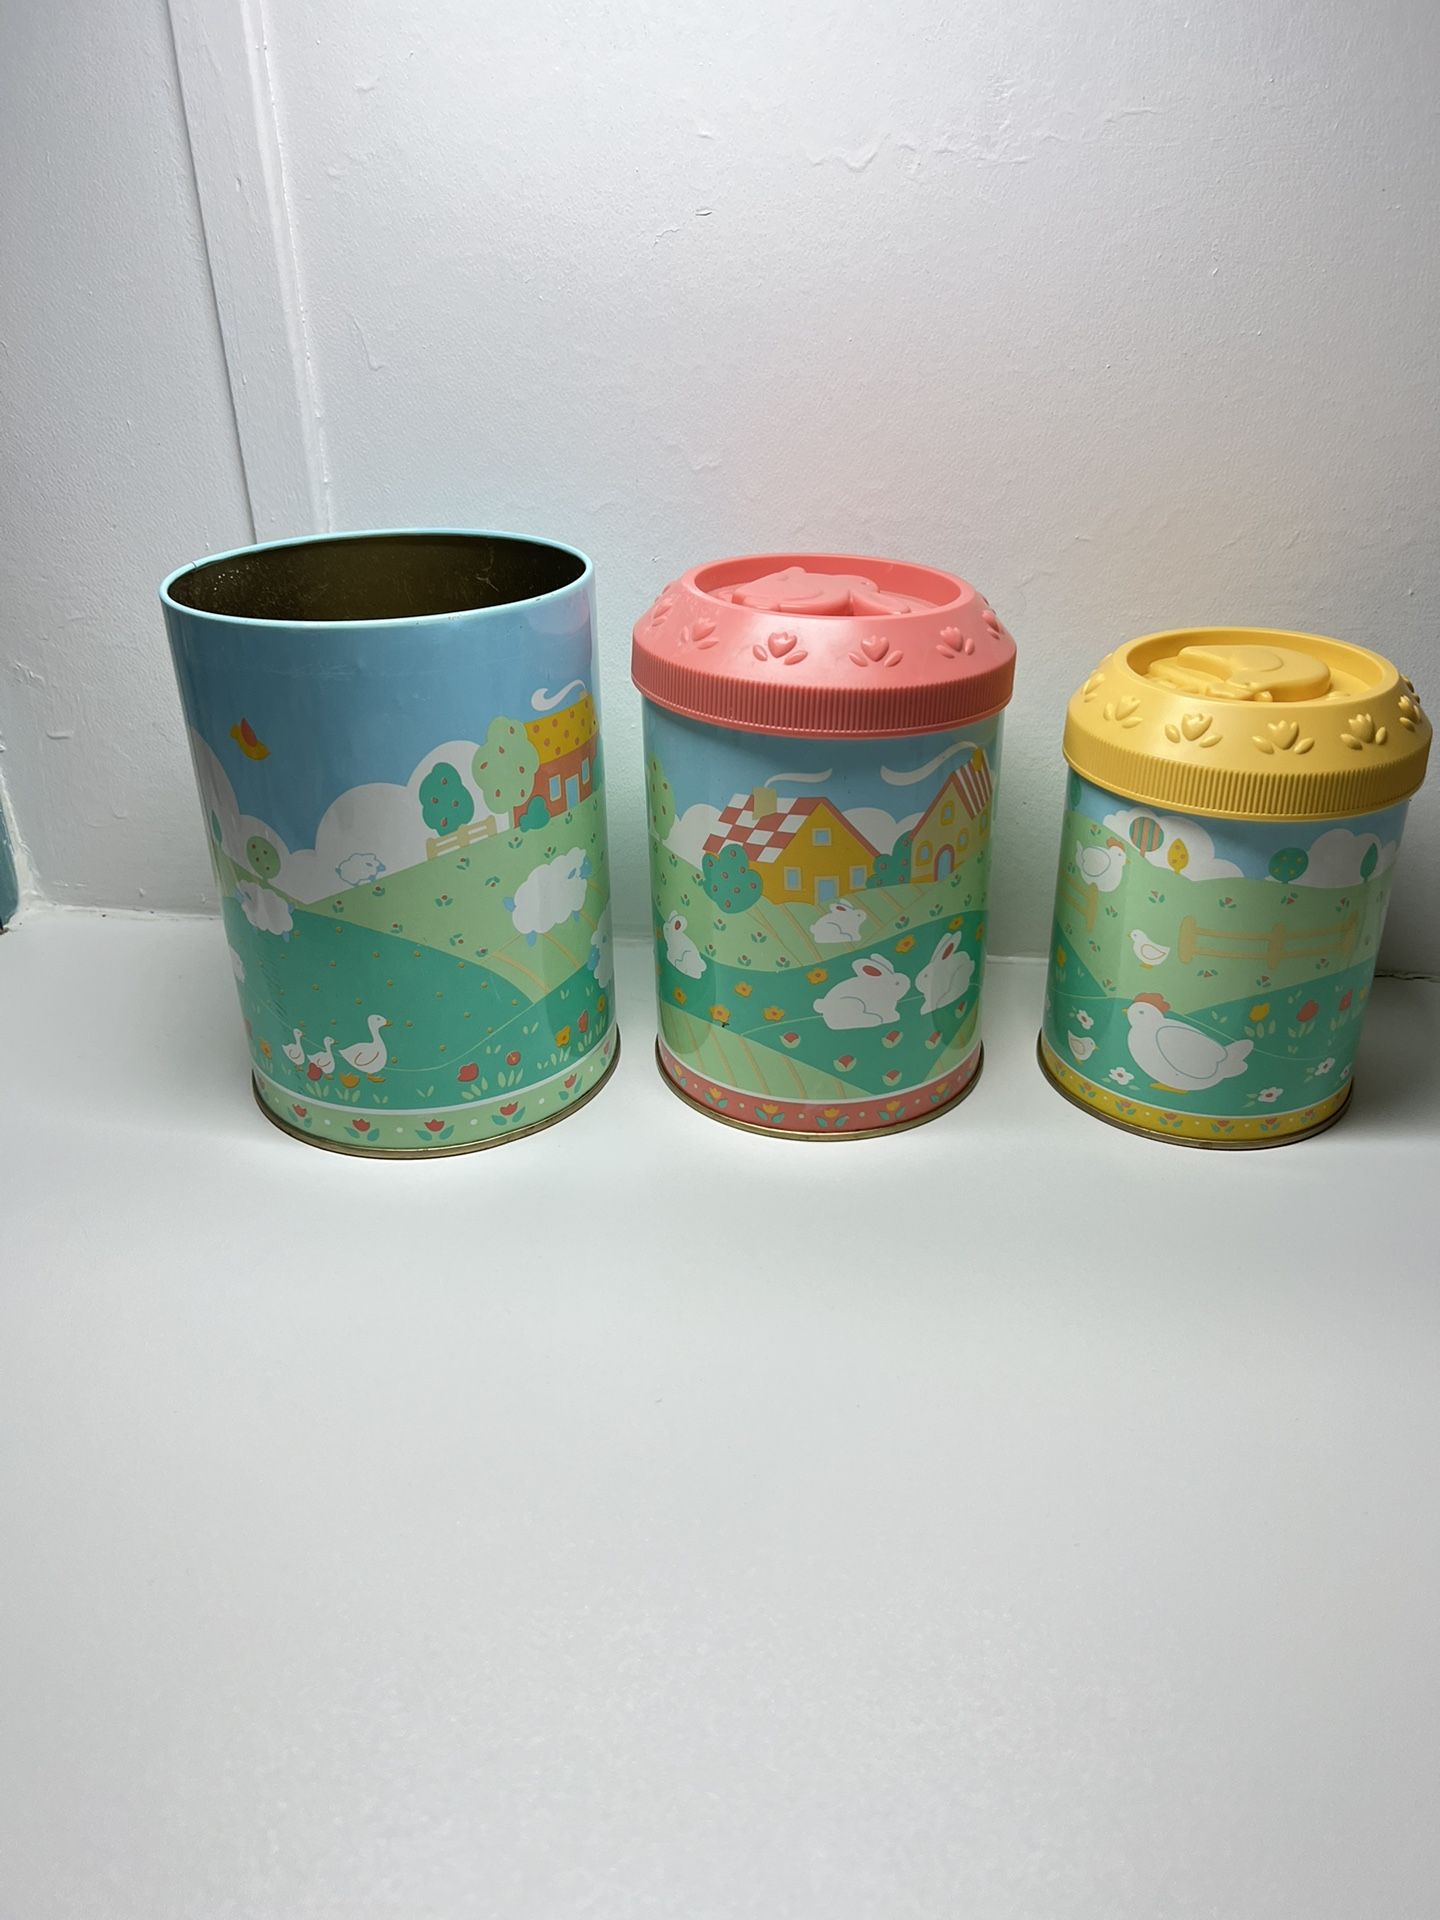 Vintage Avon Country Calico Metal Nesting Canisters Gift Collection  The covers